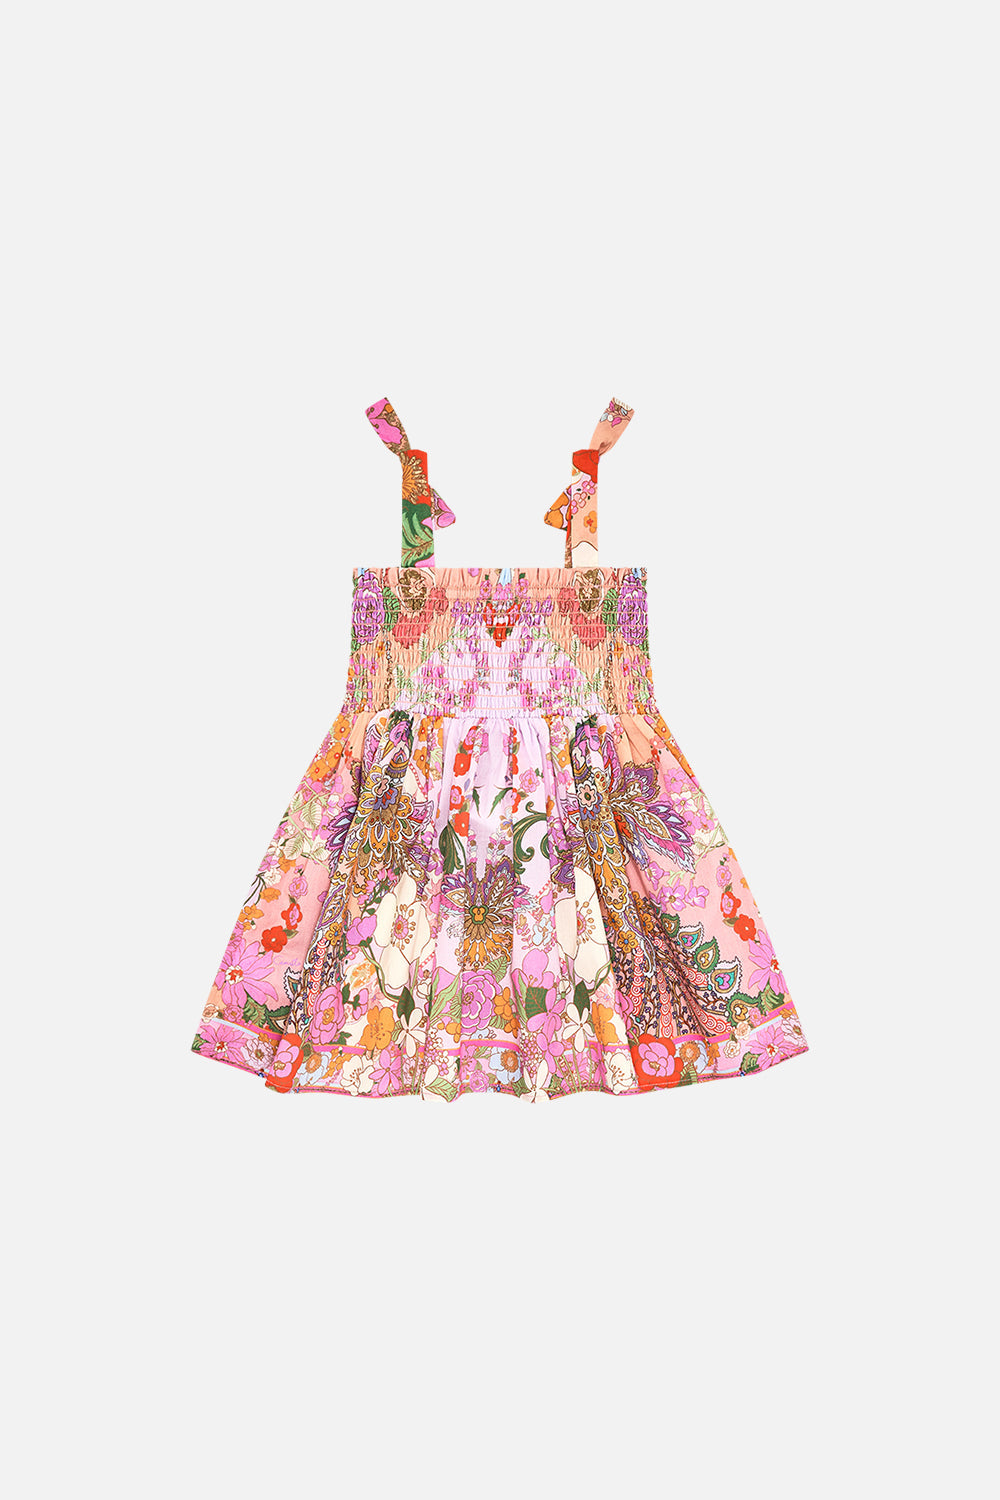 Milla by CAMILLA pink floral babies dress in Clever Clogs print